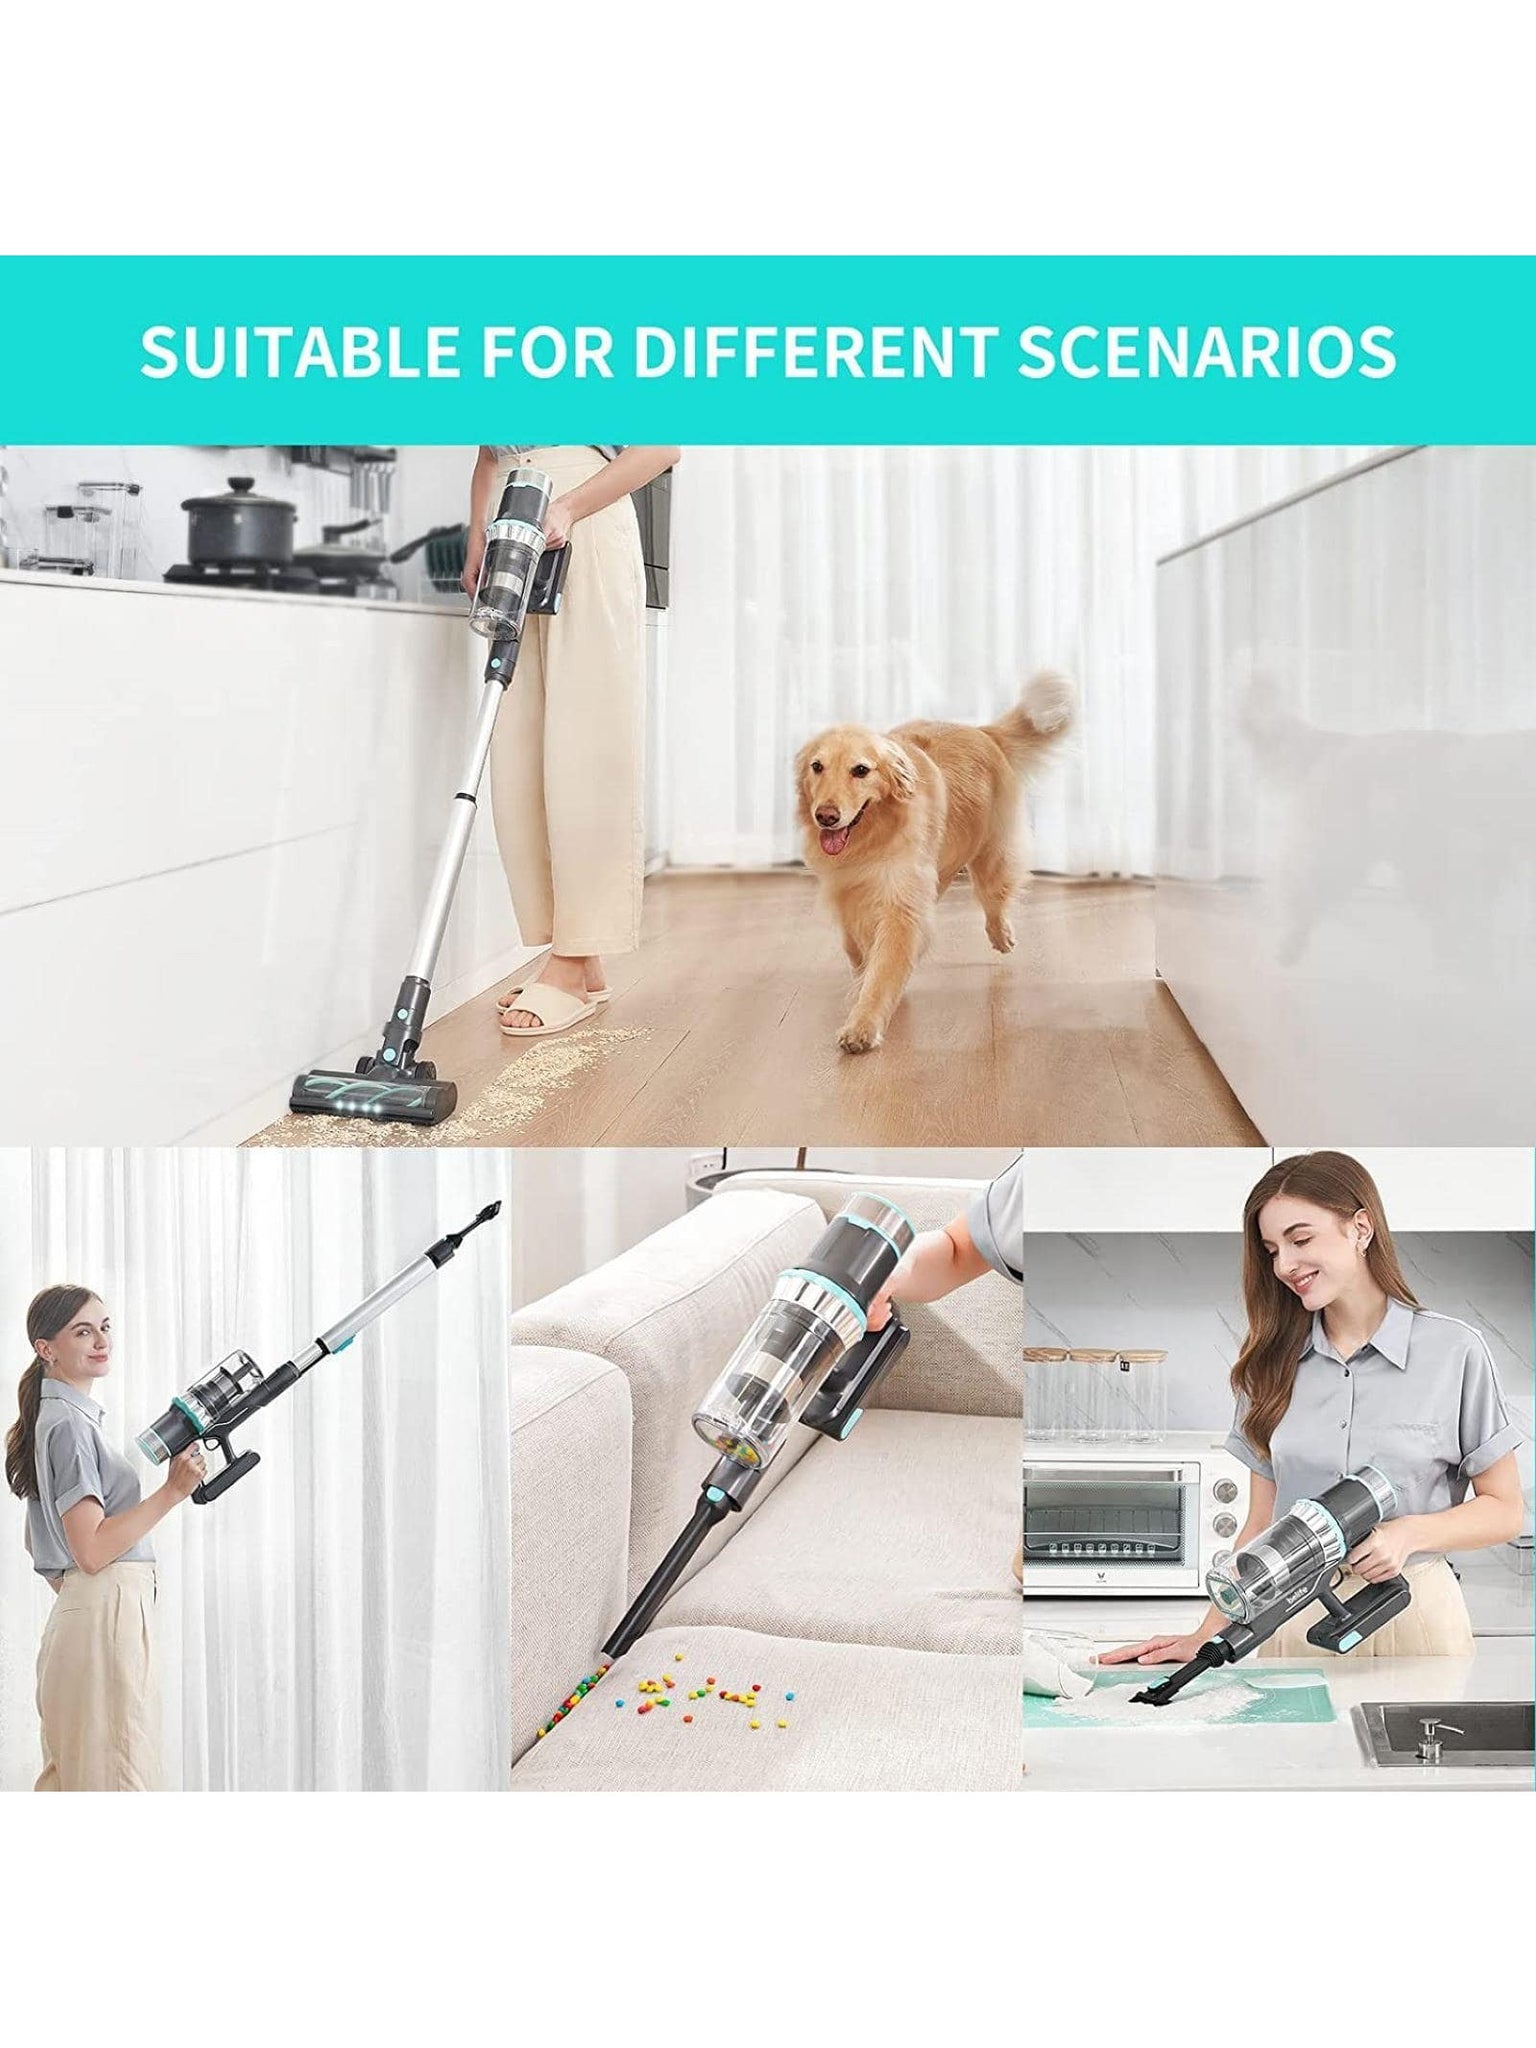 Belife BVC11 Cordless Vacuum Cleaner, Stick Vacuum with 25Kpa Powerful Suction, 380W Brushless Motor, Up to 40mins Runtime, LED Display, 6 in 1 Lightweight Vacuum for Hard Floor Carpet Car Pet Hair